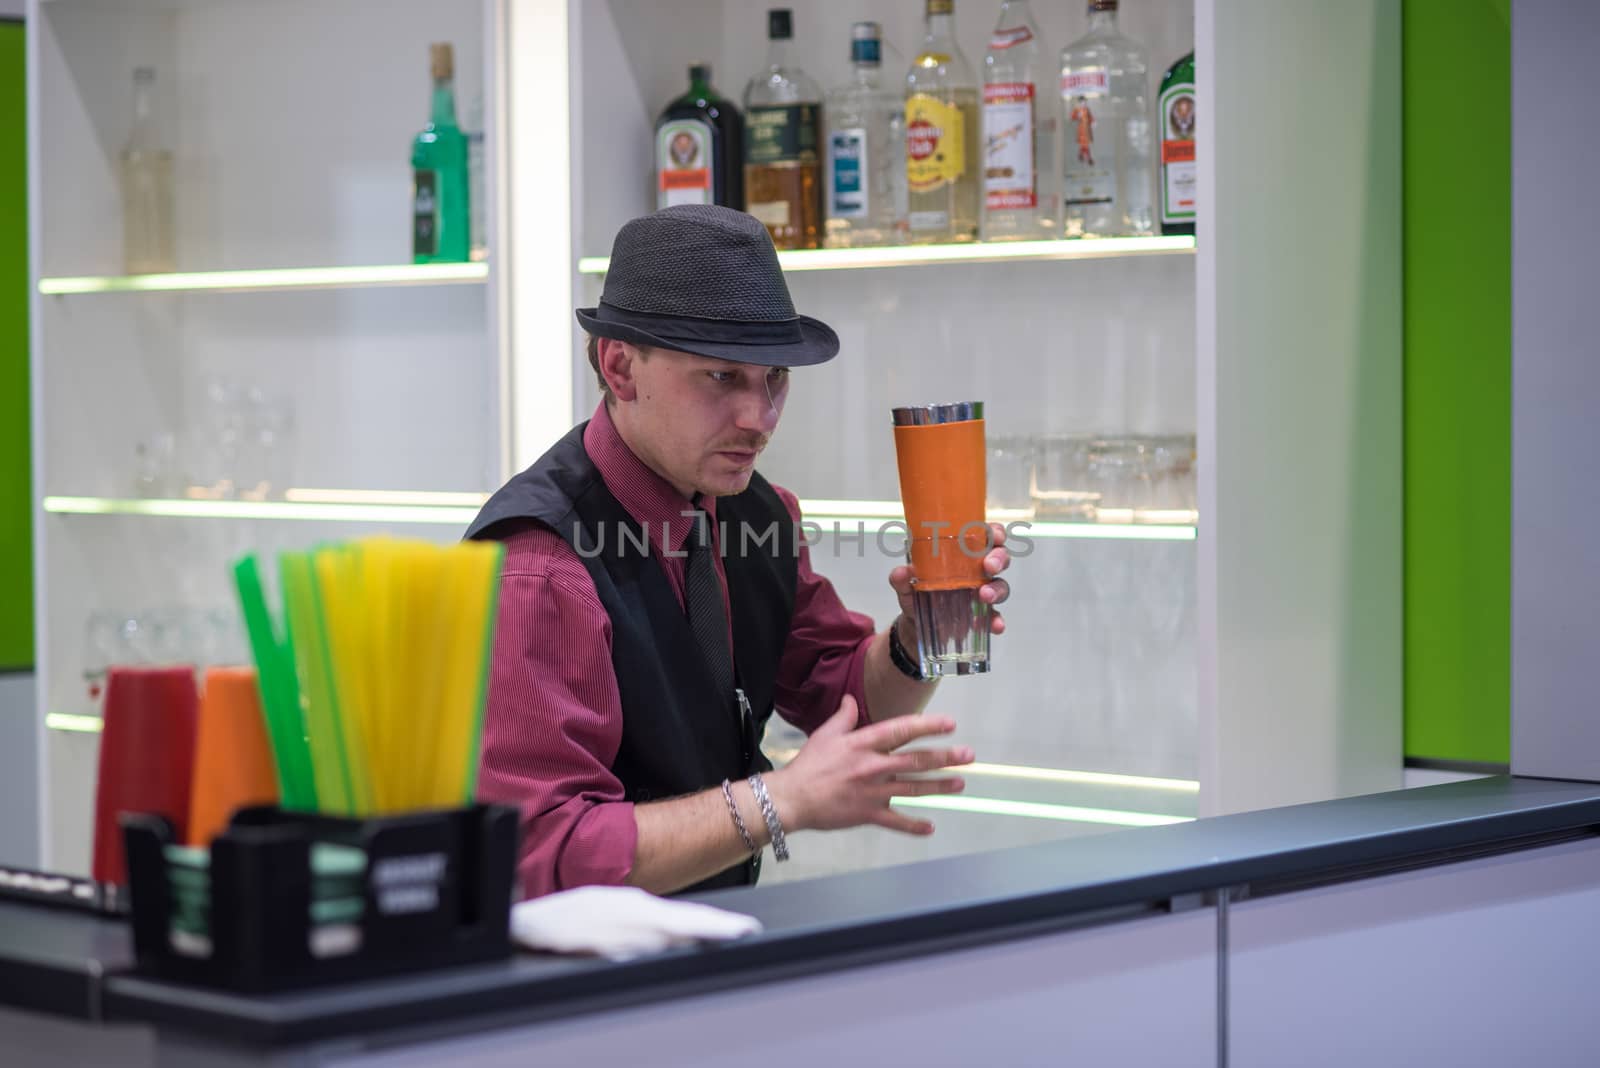 20/05/2018. Brno, Czech Republic. A barman is preparing a cocktail at the Amper convention at the Bno Exhibition Center. czech Republic by gonzalobell